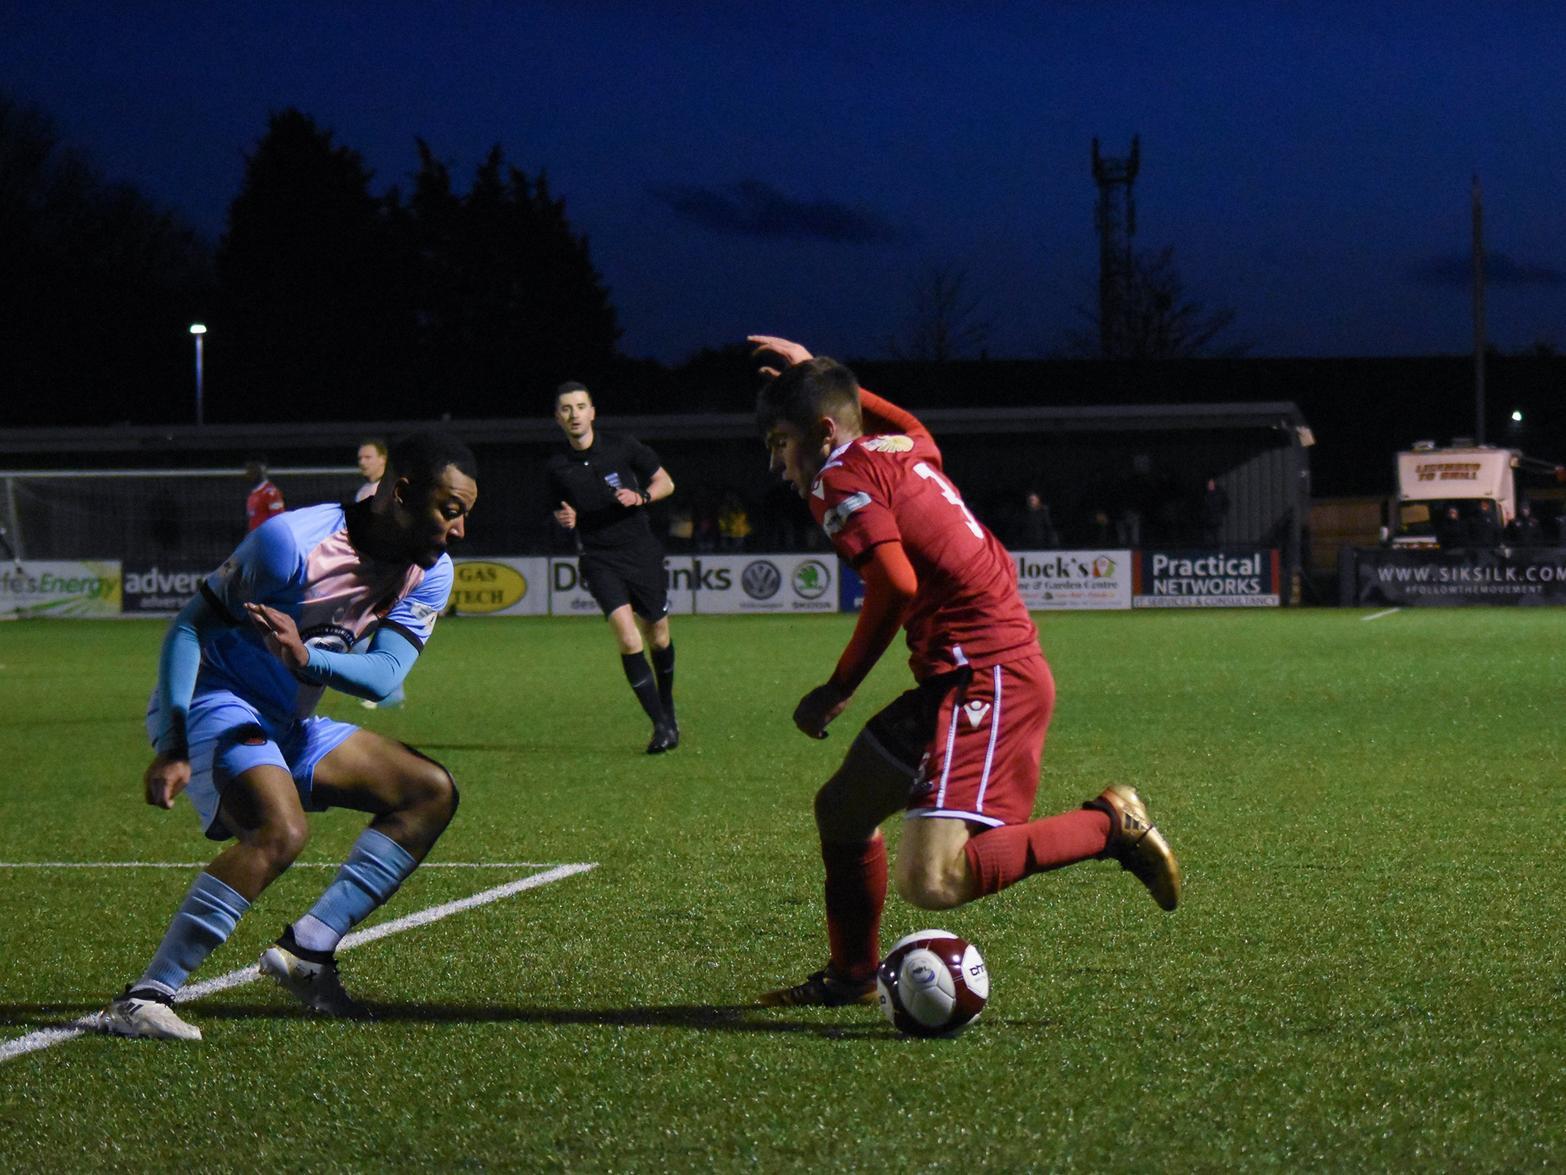 Scarborough Athletic 4-1 Mickleover Sports / BetVictor Northern Premier League / Pictures by Morgan Exley